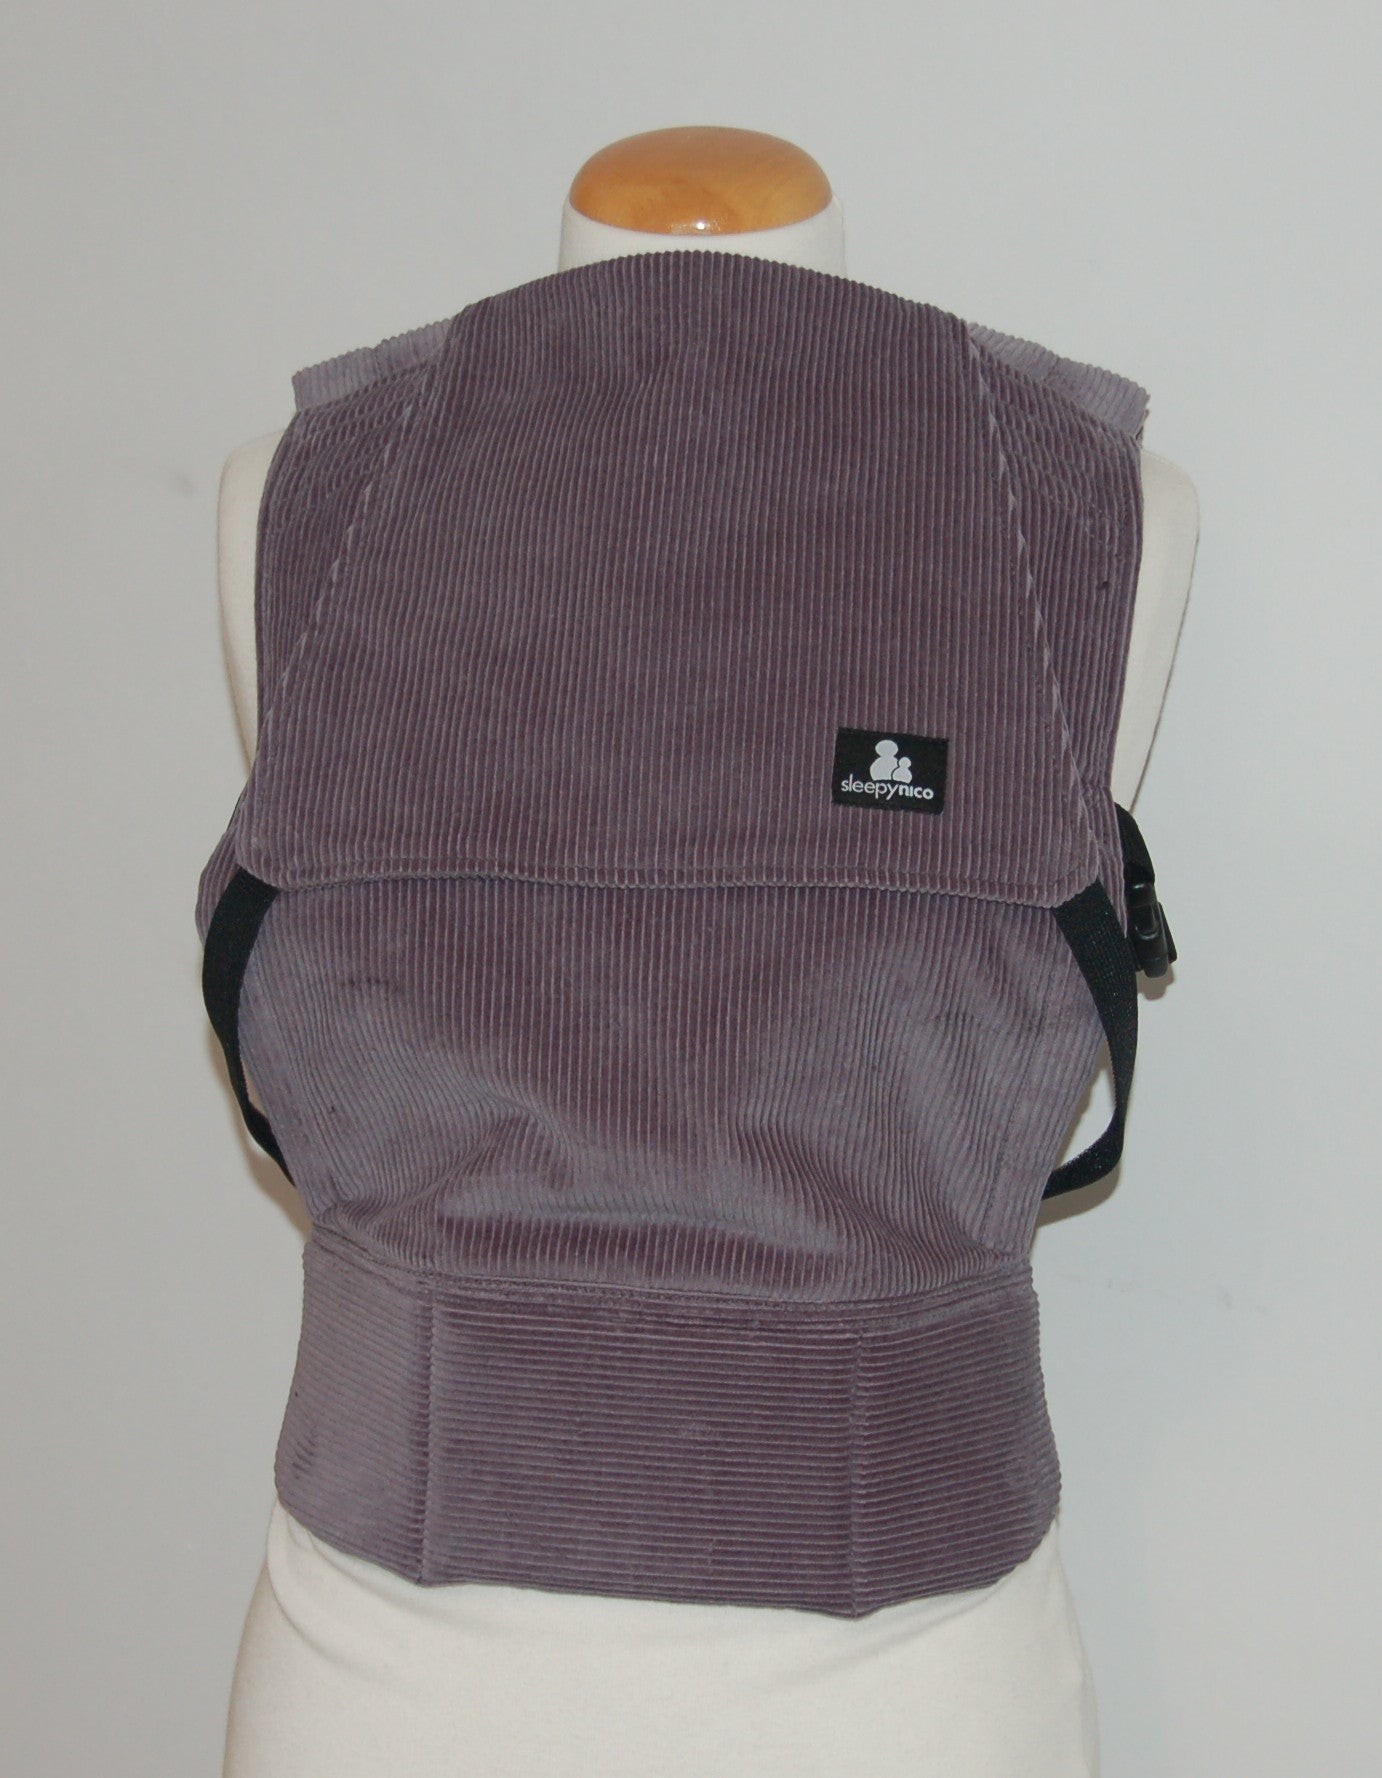 Comfy Cord in grey Baby Carrier